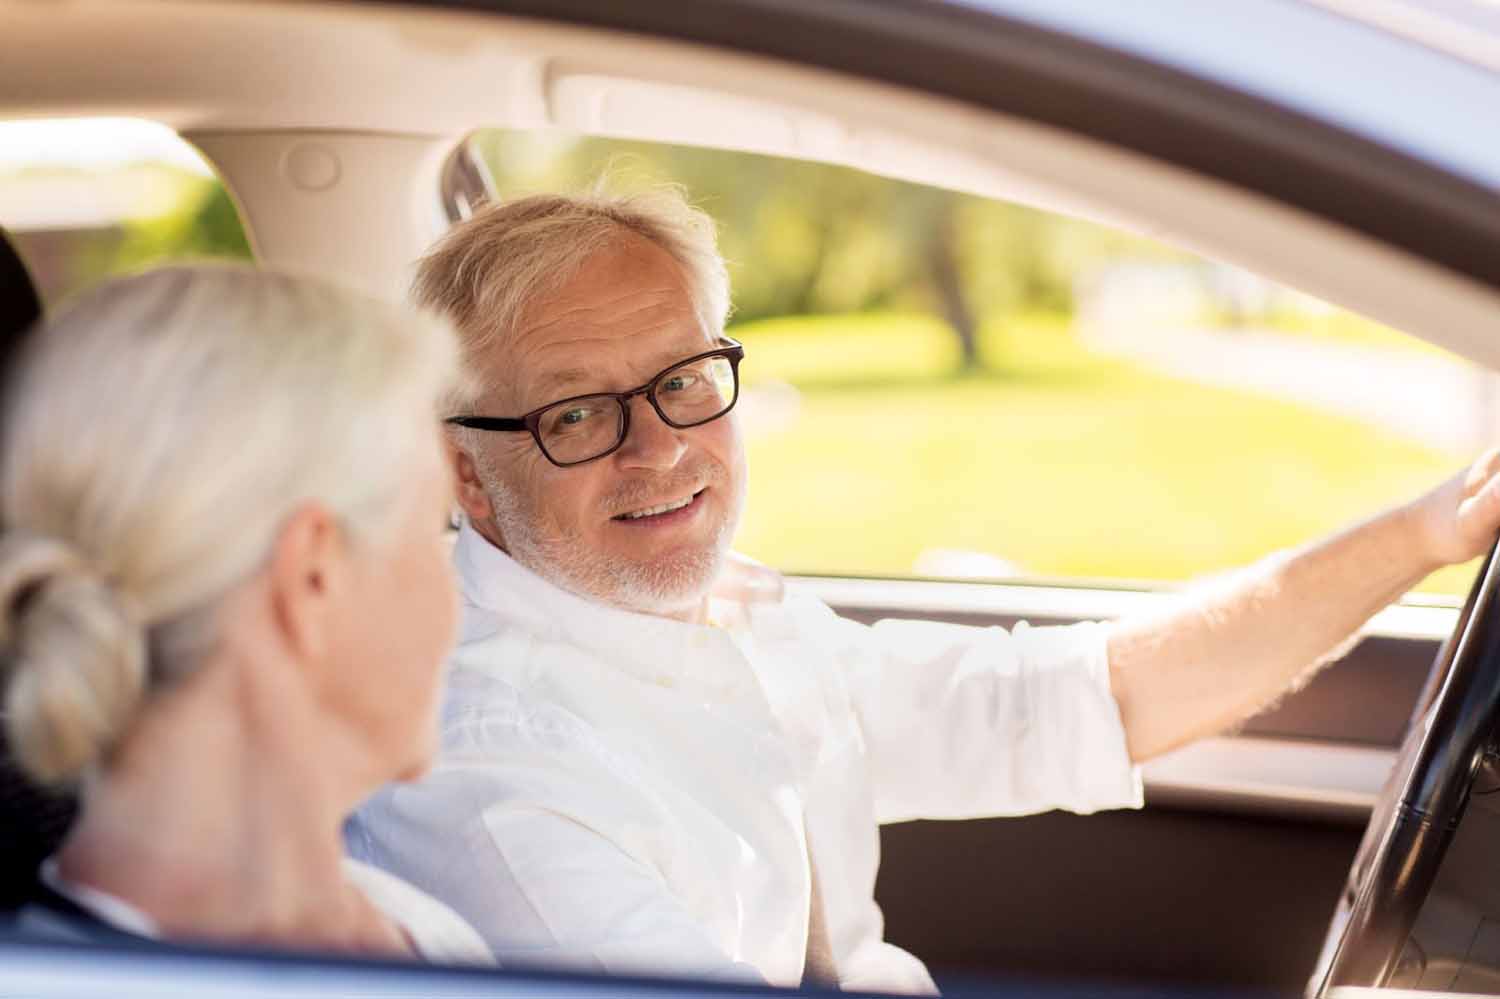 Older senior couple smiling and happy driving in the car. Husband is driving the wife in daylight, practicing safer driving habits.